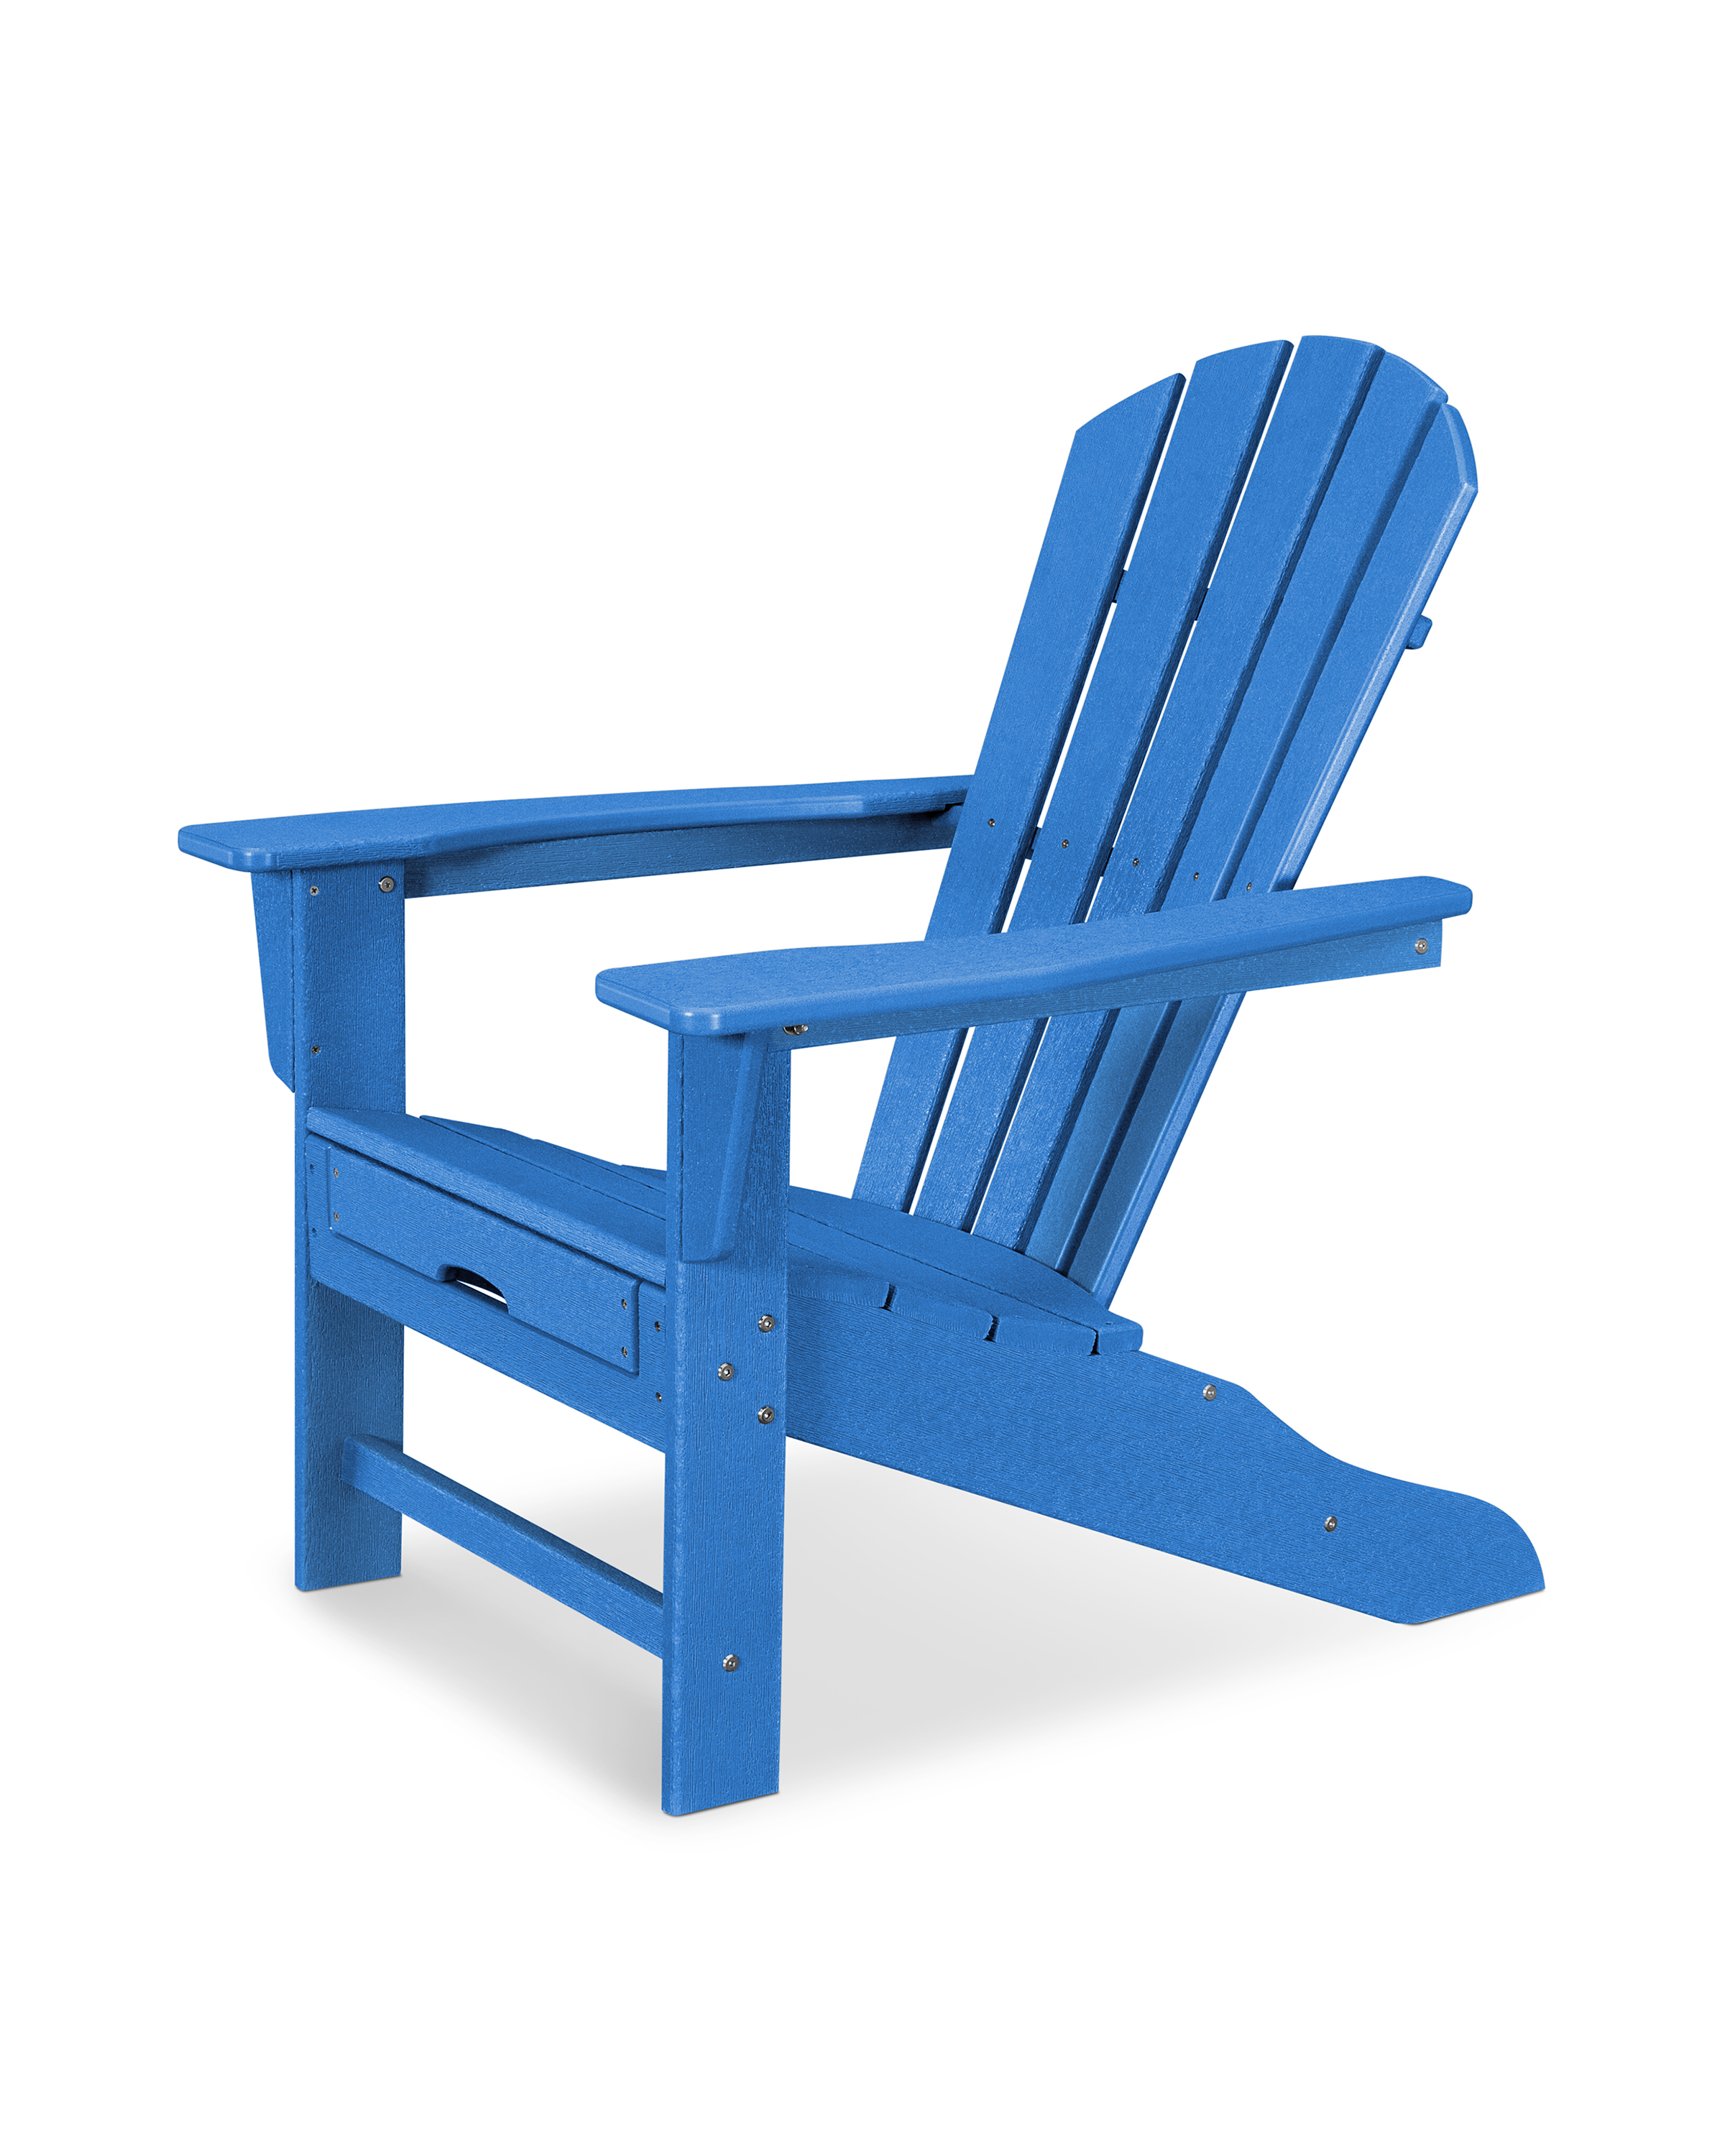 palm coast ultimate adirondack with hideaway ottoman in vintage pacific blue thumbnail image